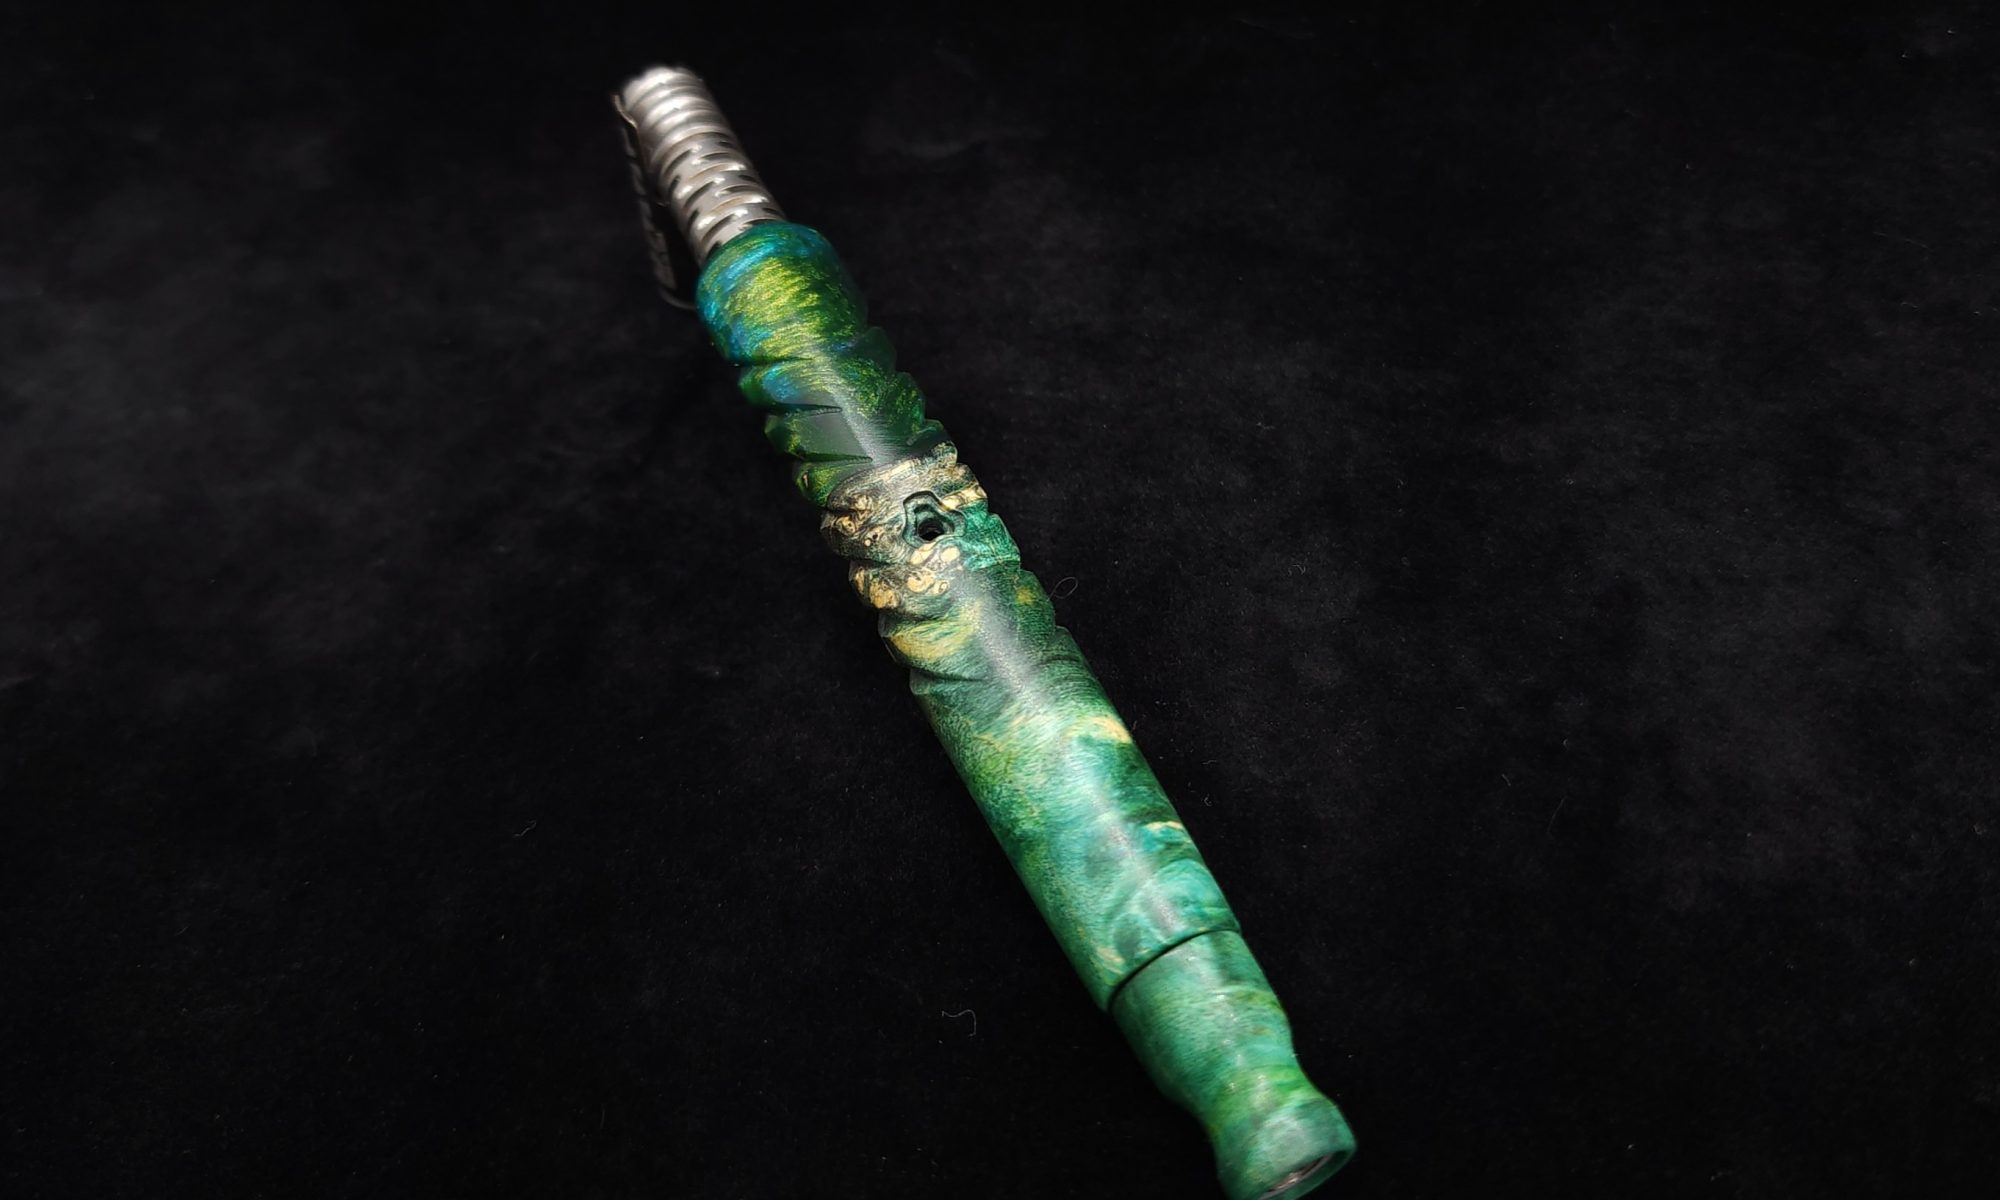 This image portrays Reaper XL Dynavap Stem/Burl Wood Hybrid+Matching Mouthpiece by Dovetail Woodwork.